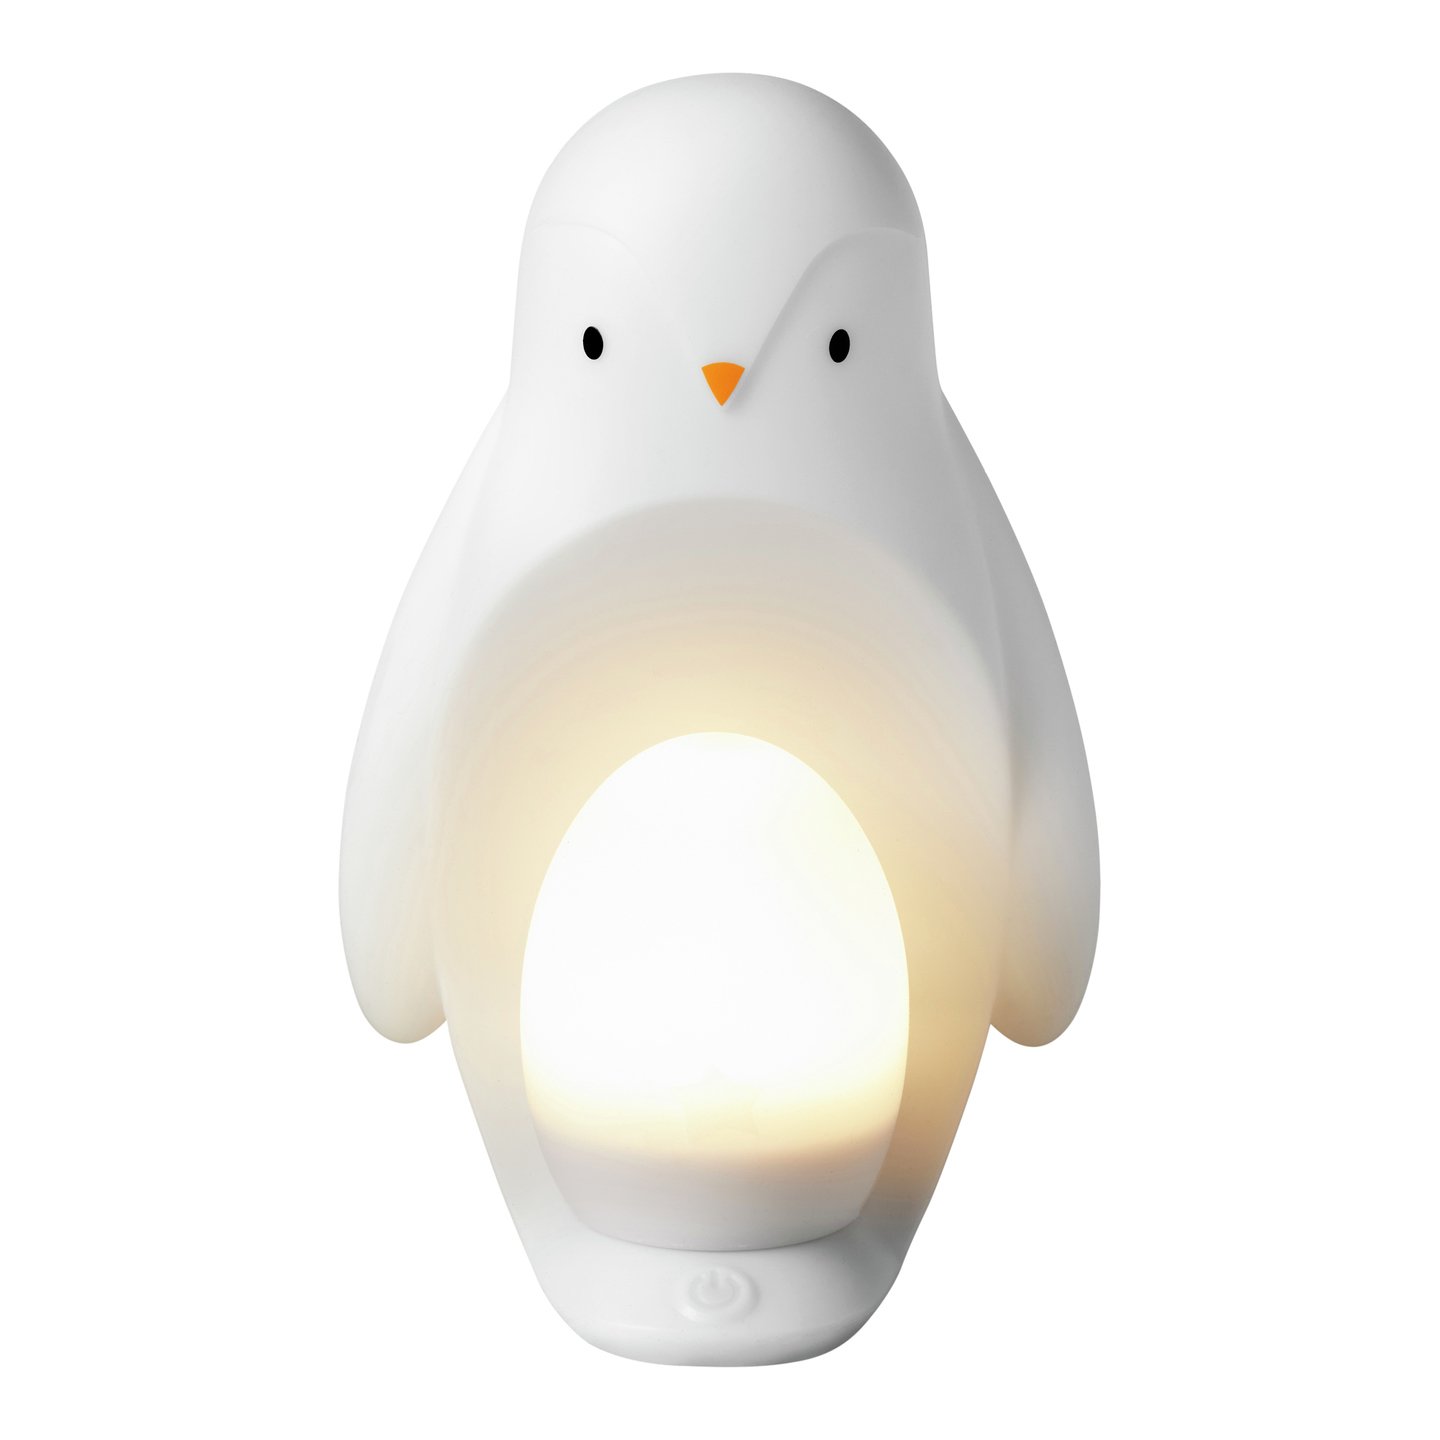 Tommee Tippee Penguin Night Light Review